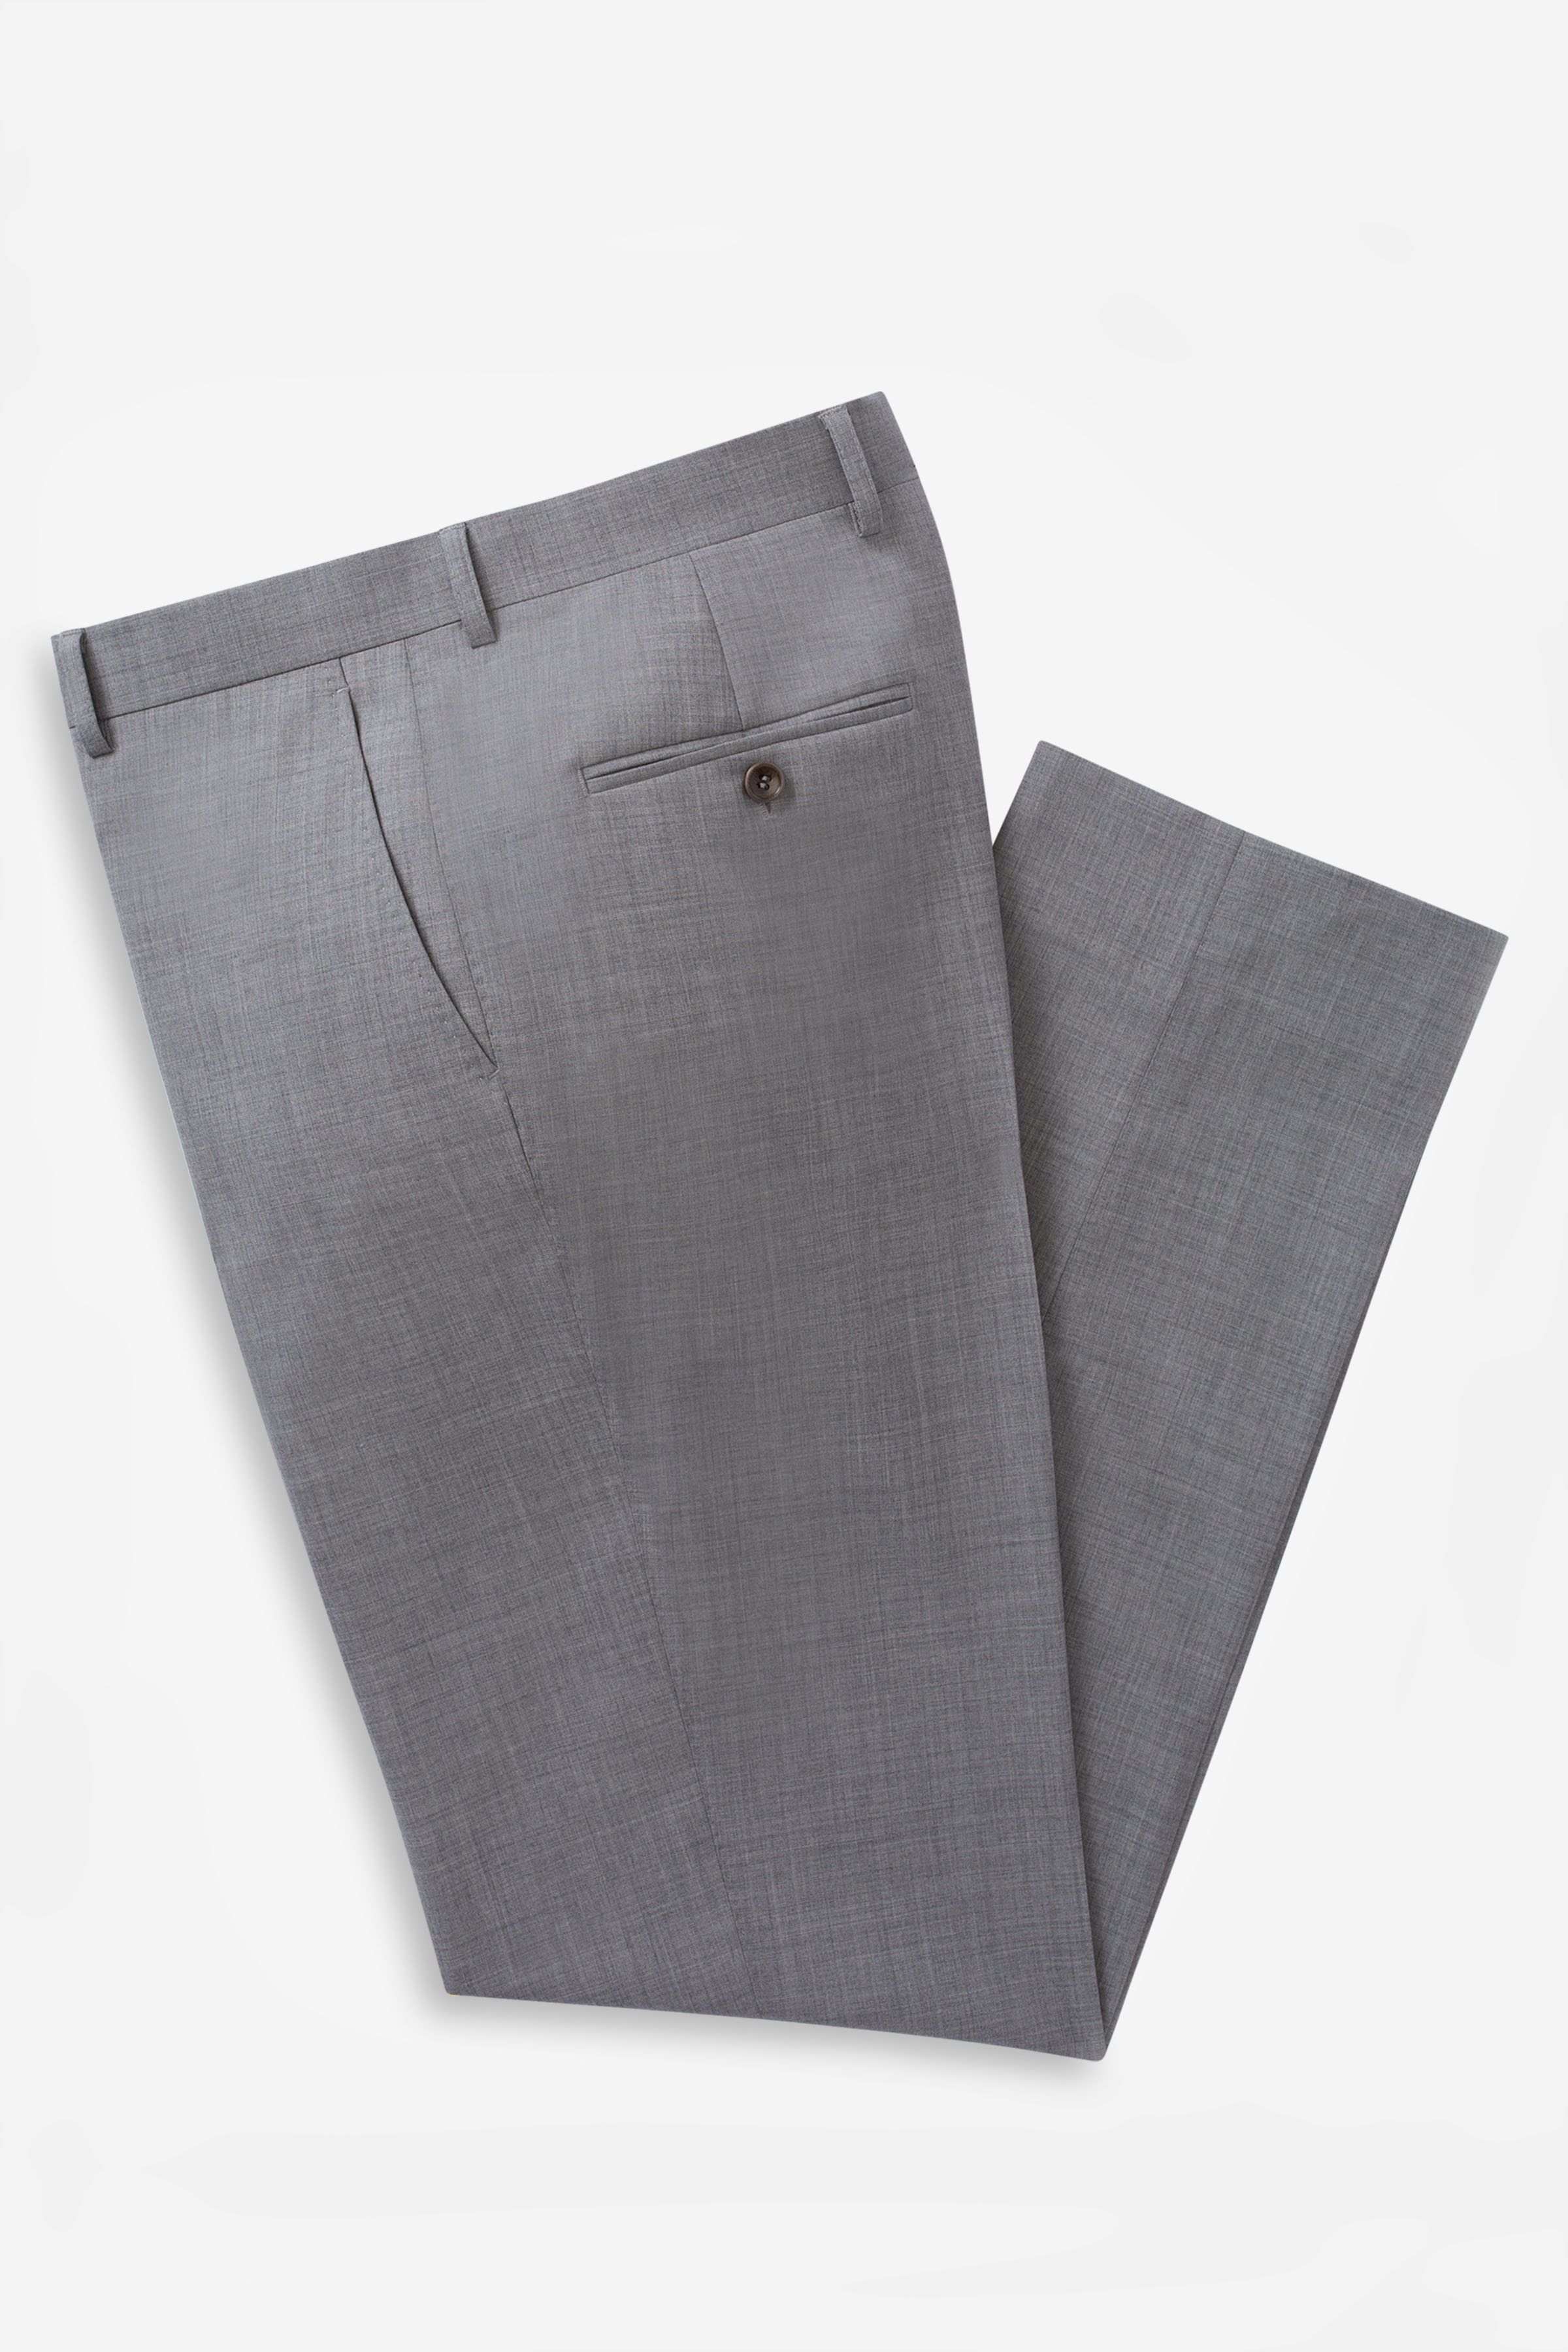 Knot Standard Grey Trousers by Knot Standard